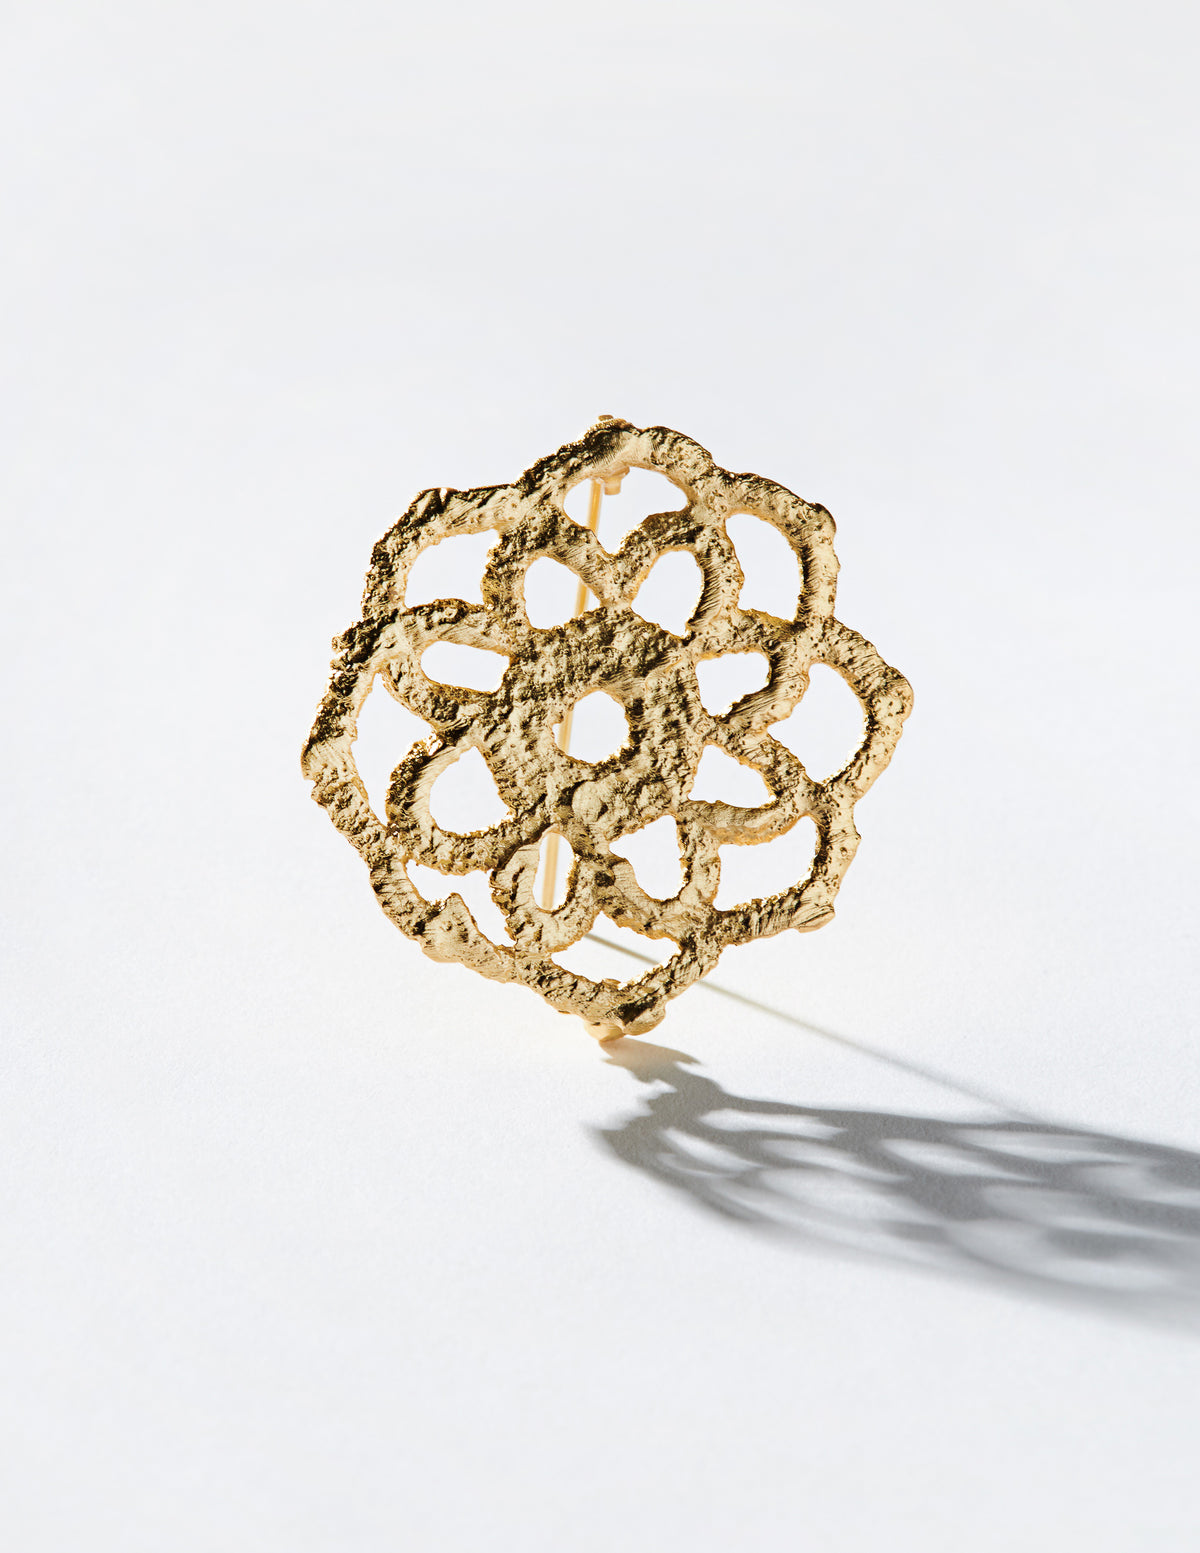 Rosette Brooch - CHARALAMPIA